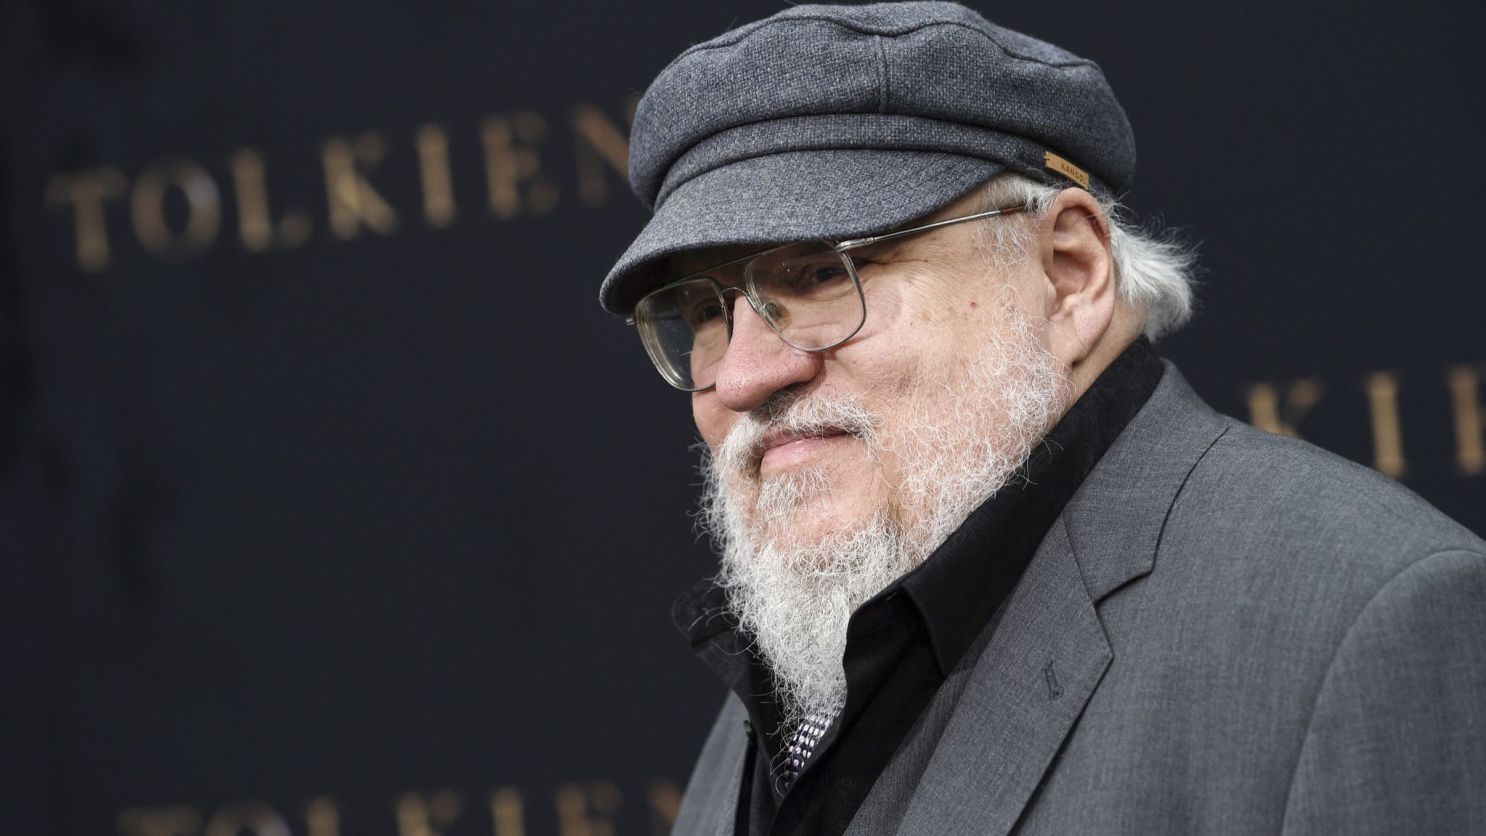 The Winds of Winter Release Date delayed again as George RR Martin is Buys writing other Projects